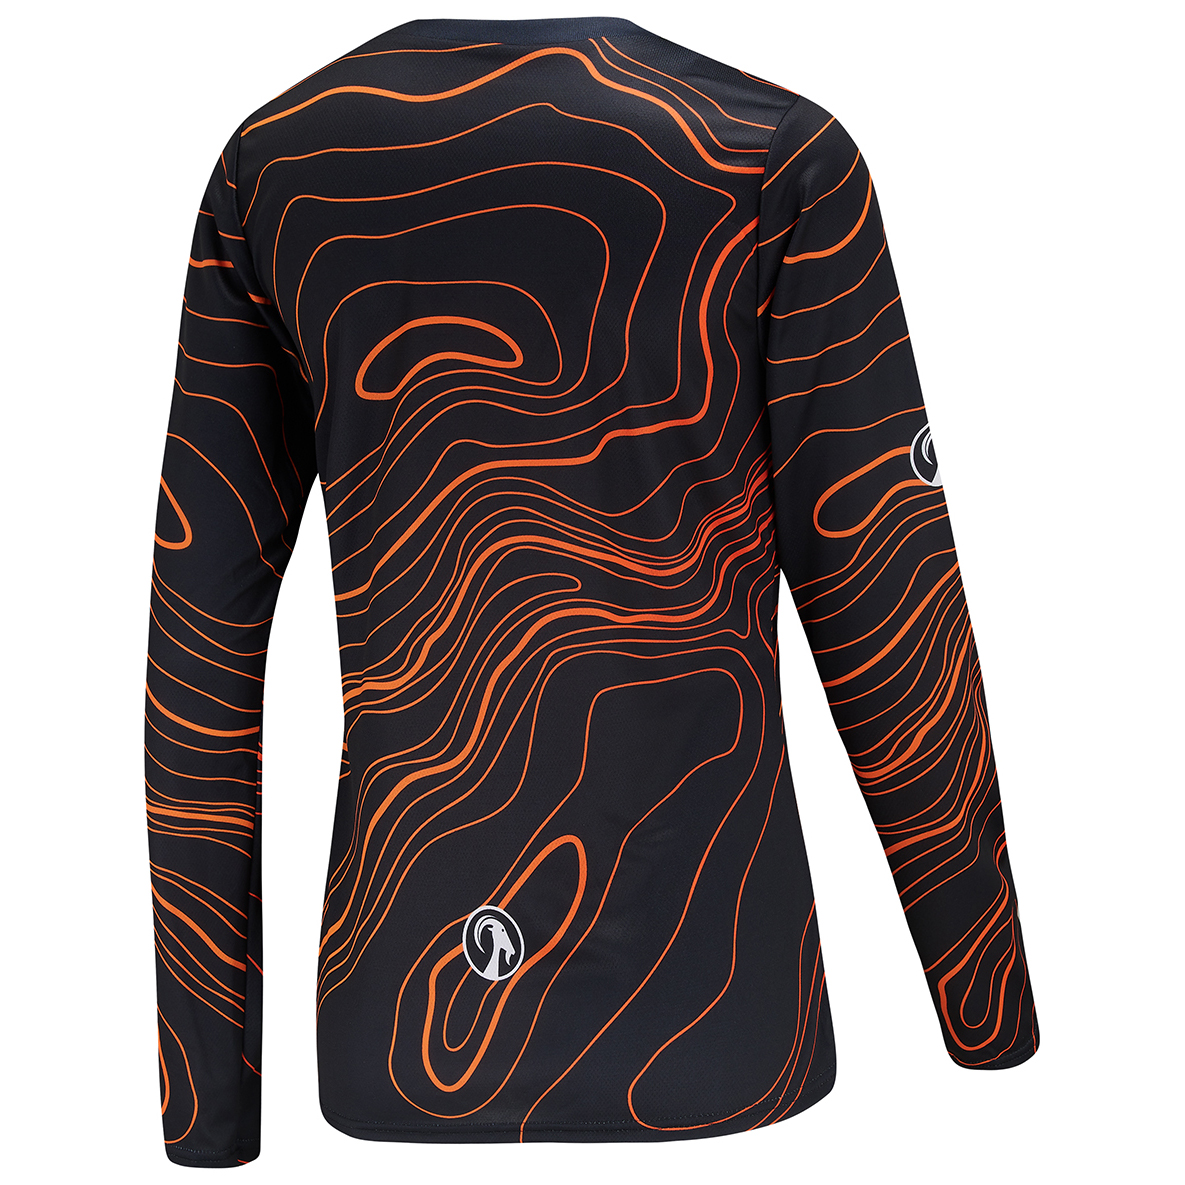 Rear view of Stolen Goat women's Topo mountain bike jersey black long-sleeved jersey with orange topographical design